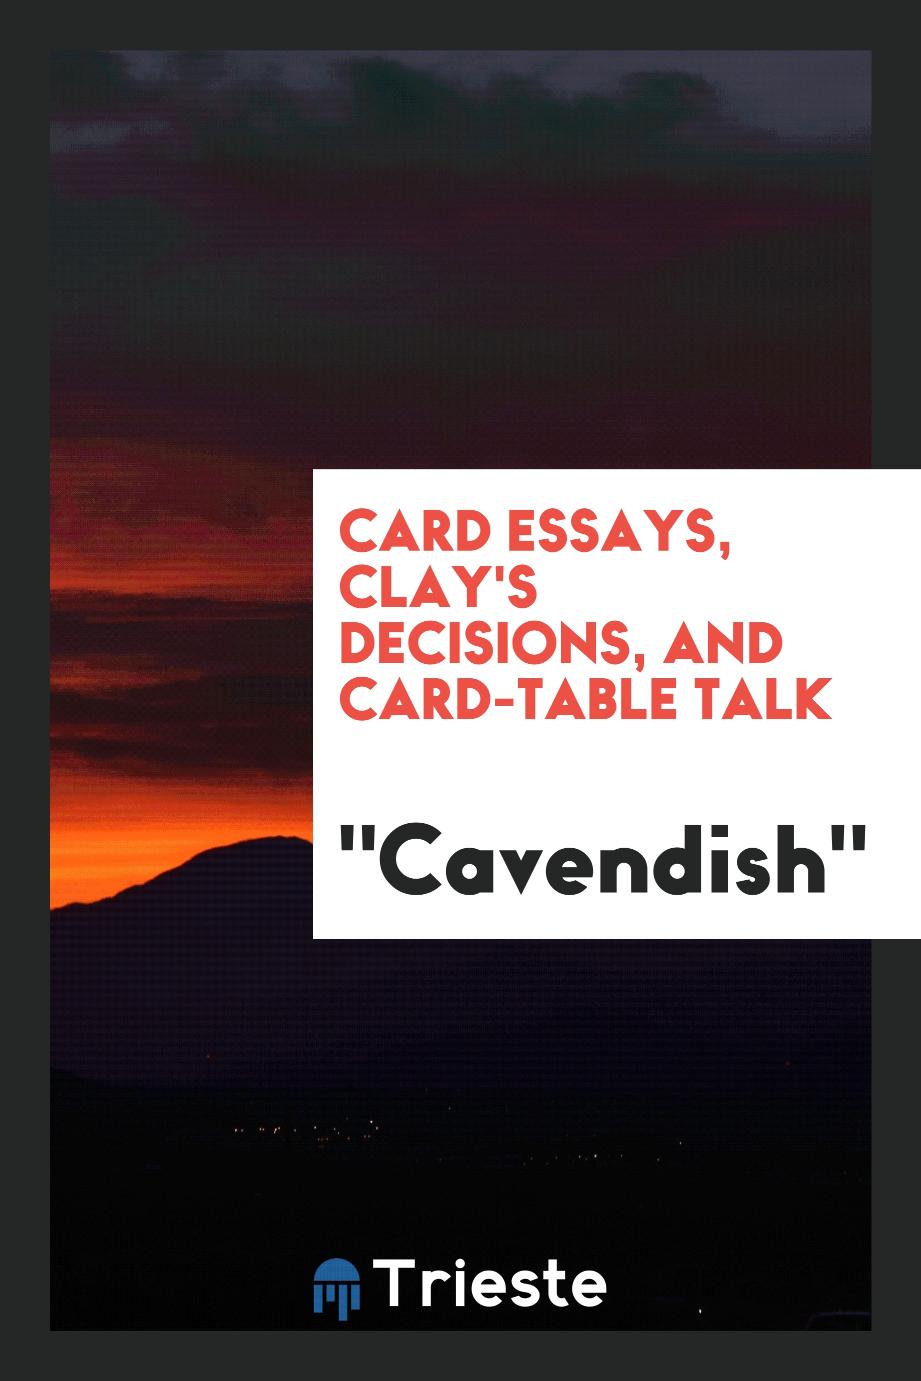 Card essays, Clay's decisions, and card-table talk